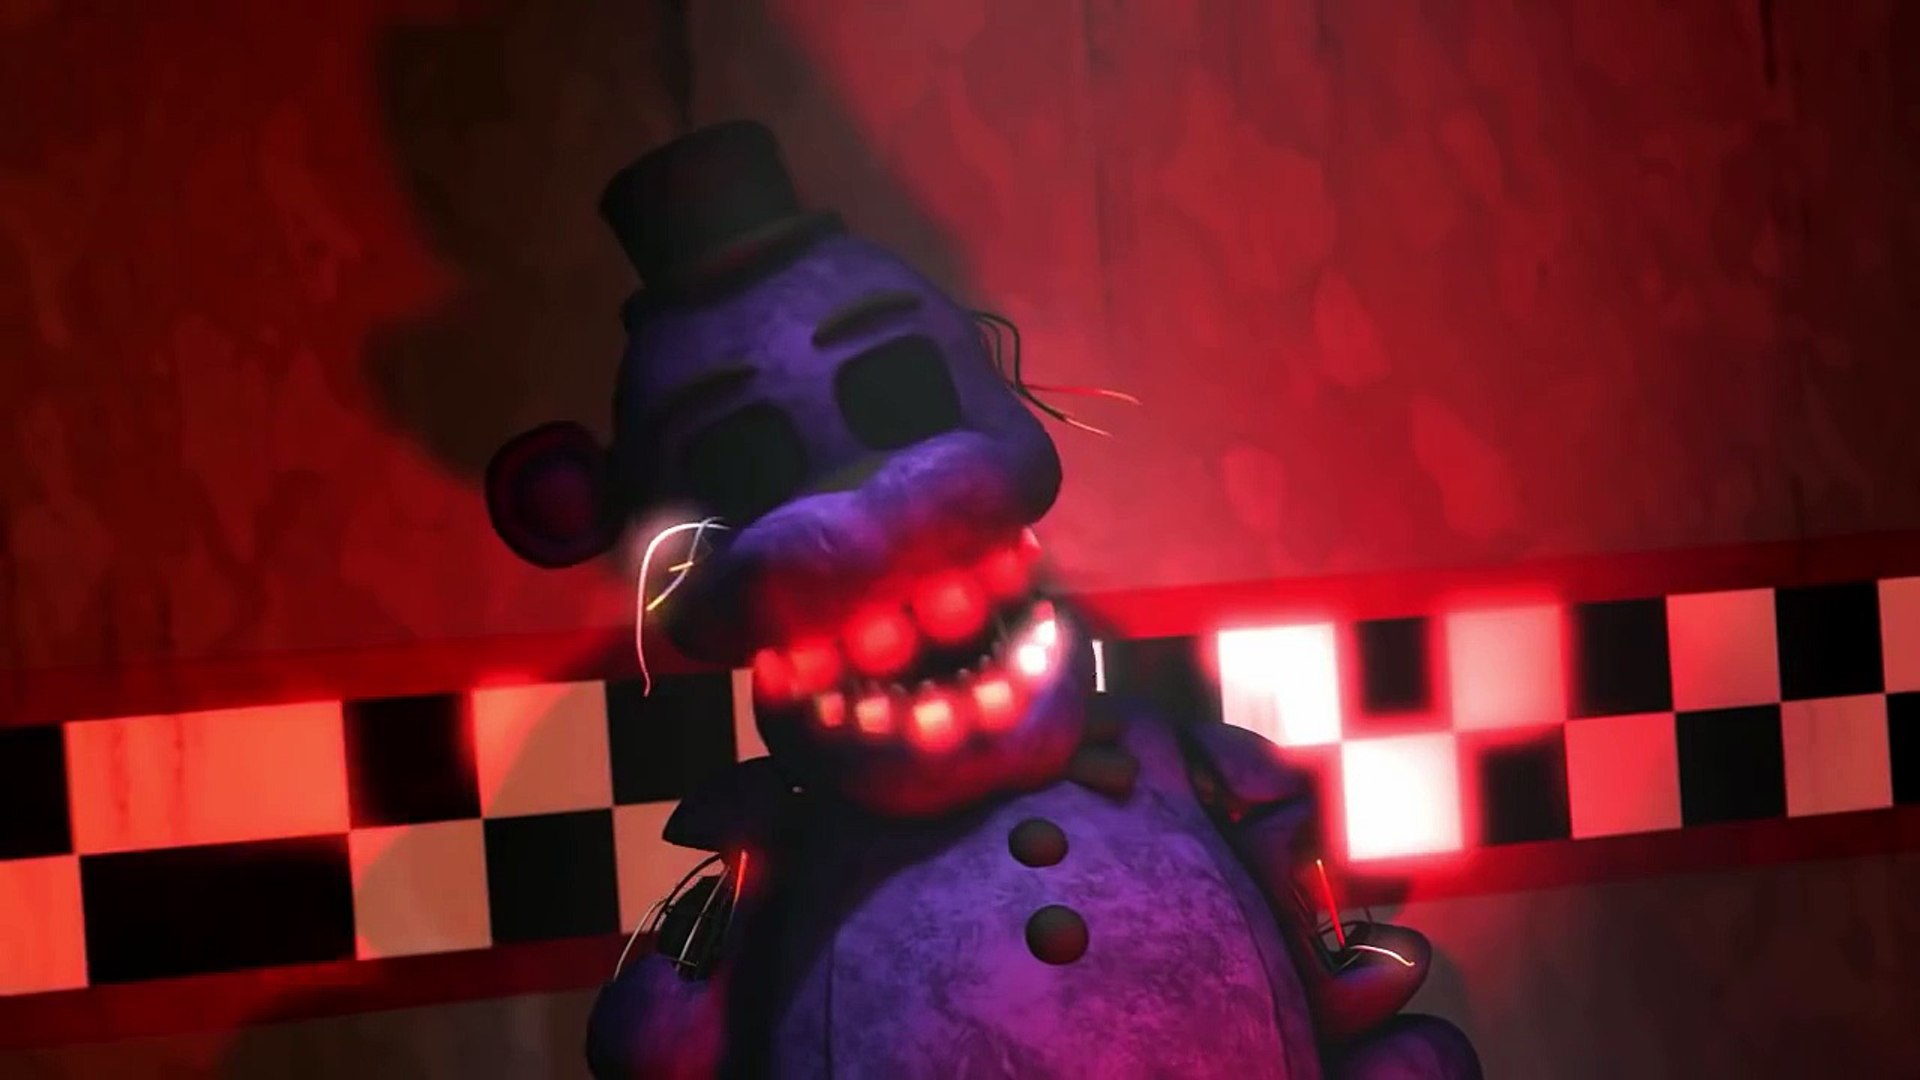 Shadow Freddy (Five Nights at Freddy's) HD Wallpapers and Backgrounds